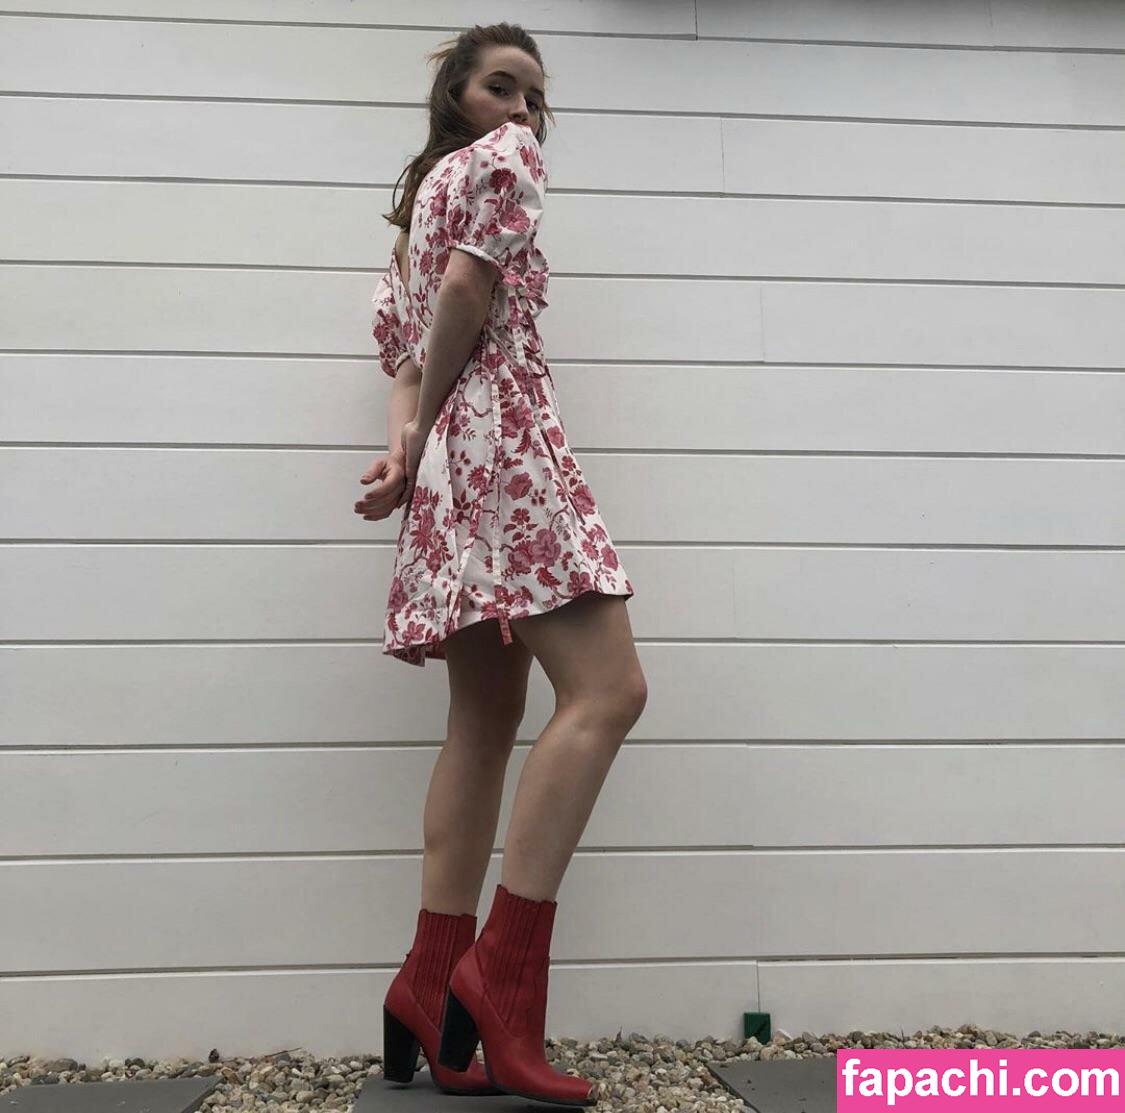 Kaitlyn Dever Kaitlyndever Leaked Nude Photo 0056 From Onlyfans Patreon